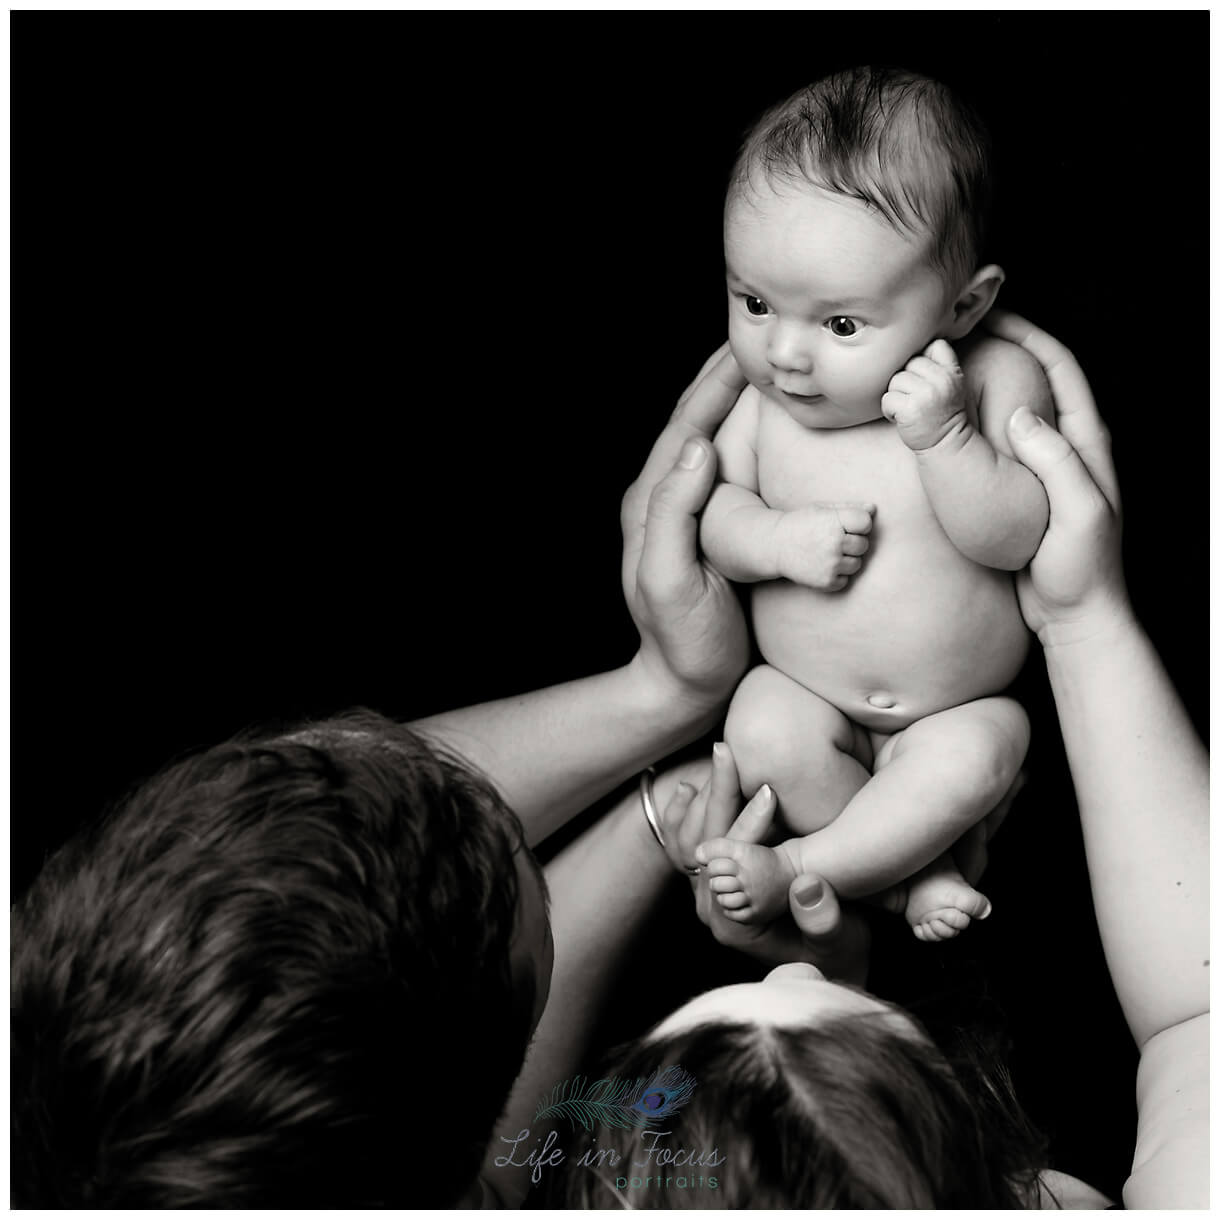 parents with newborn baby Life in Focus Portraits baby photography Balloch Alexandria Luss